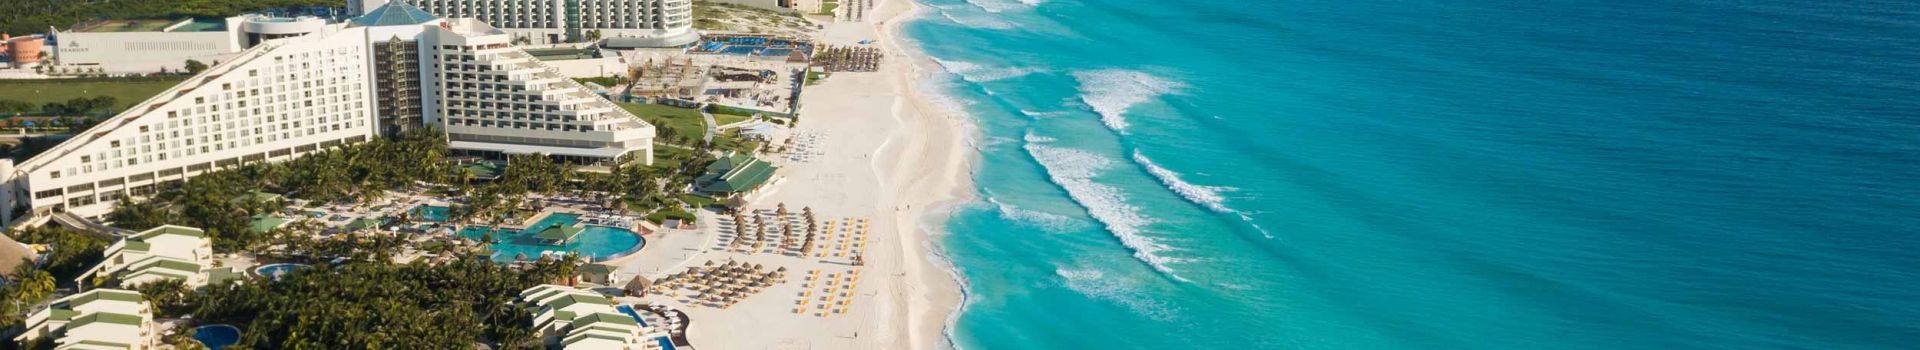 All inclusive holidays to Cancun